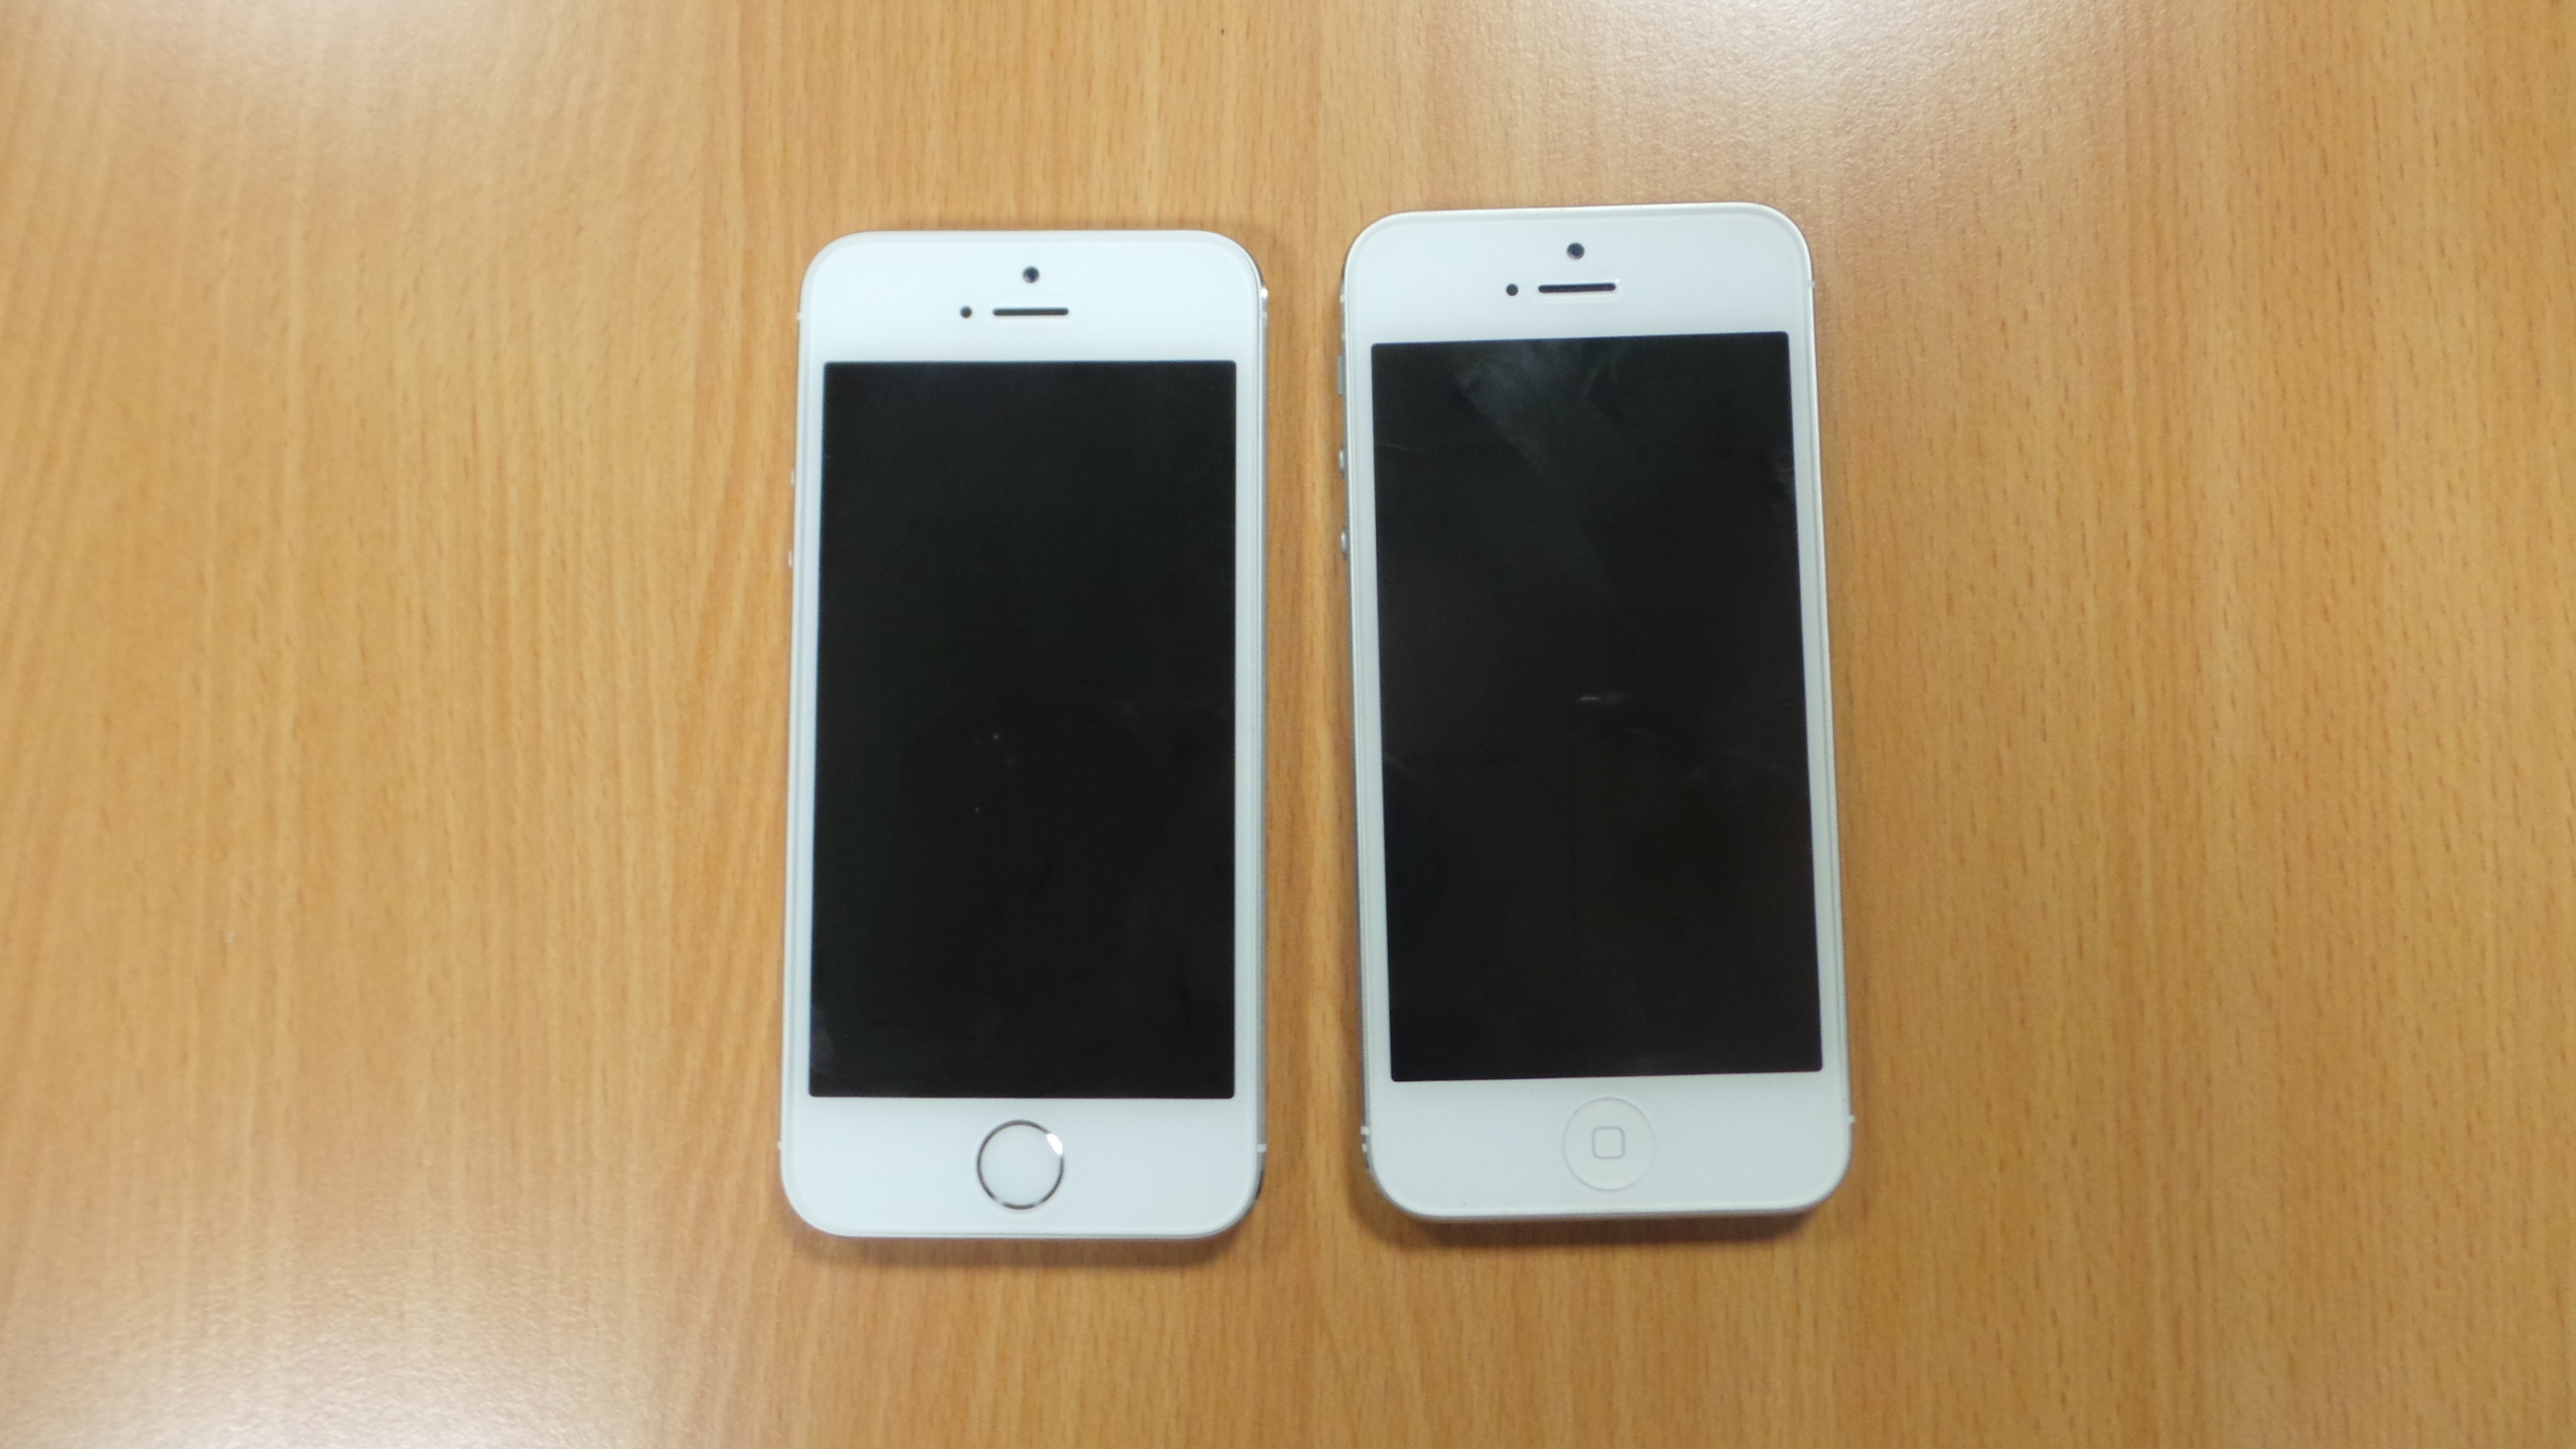 Iphone 5s Vs Iphone 5 Head To Head Review  The Inquirer